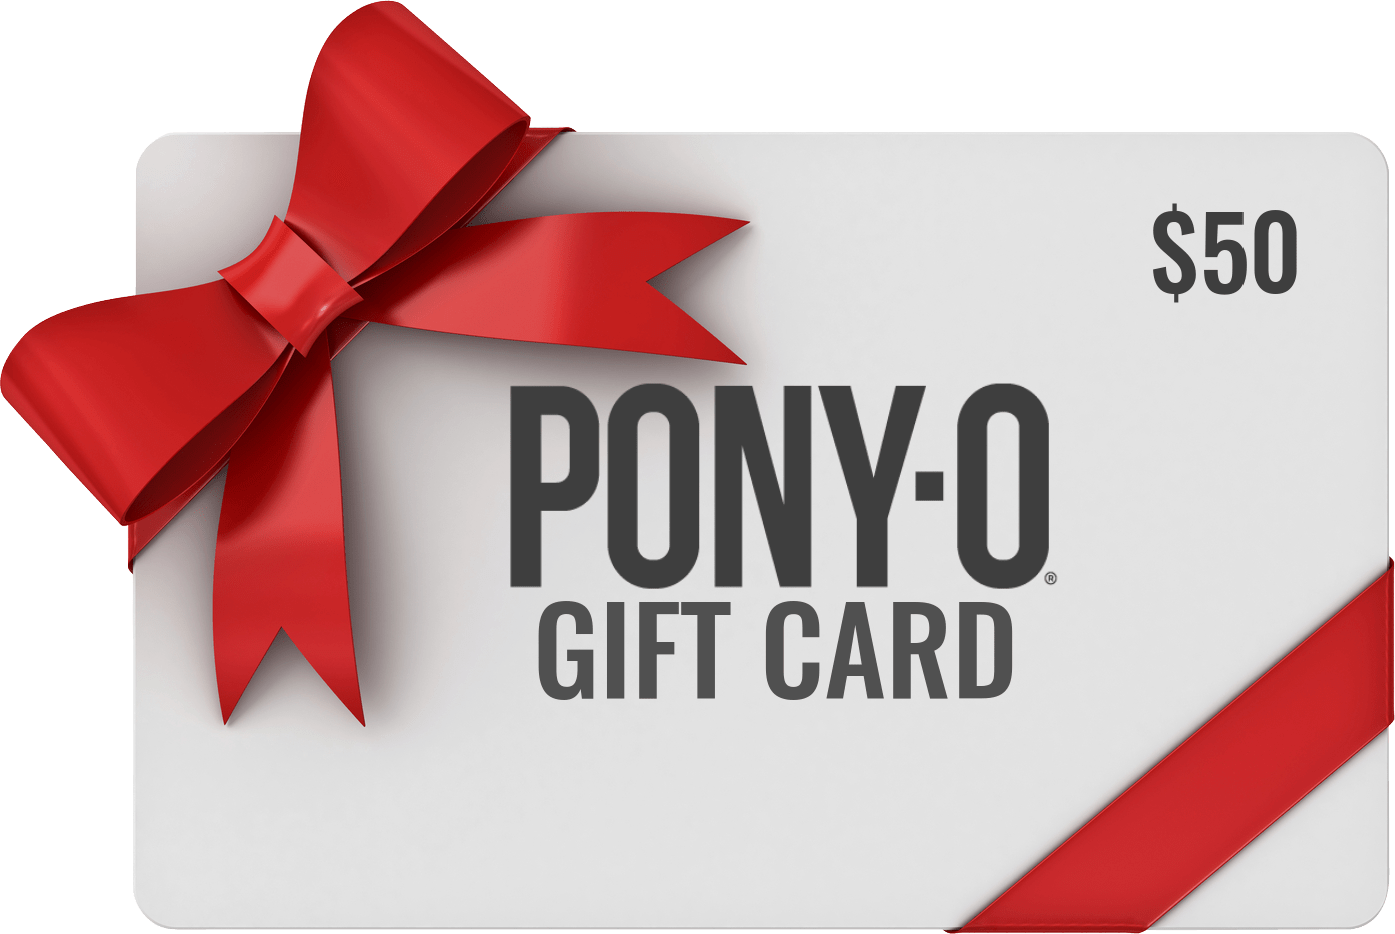 One fifty dollar PONY-O gift card. Not a physical card, but an electronically-transmitted item.